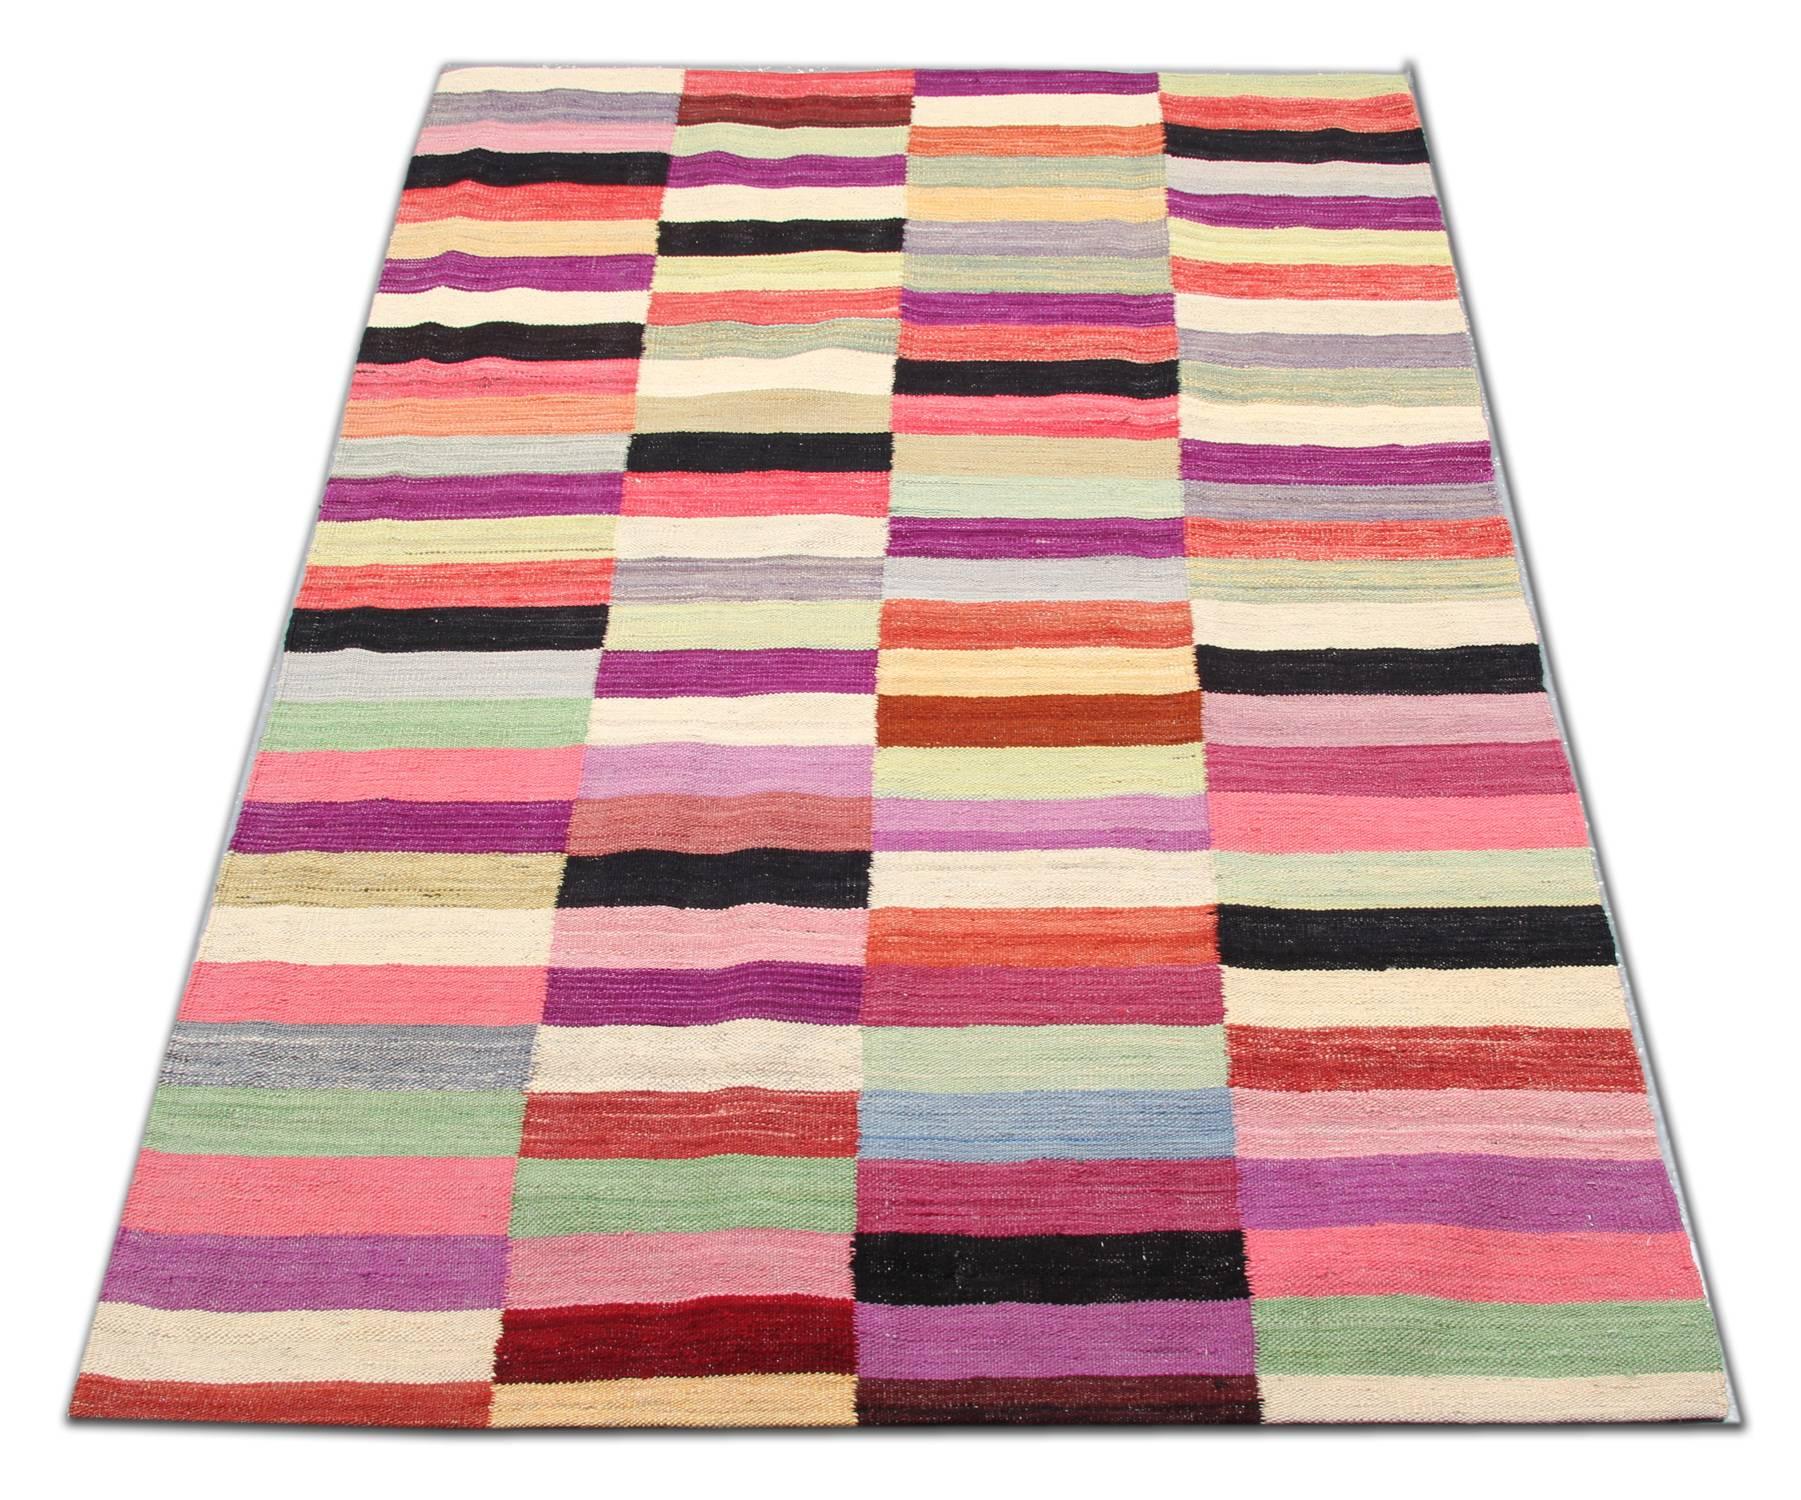 These striped wool rugs derive from Afghanistan. It is an entirely handwoven rug with the best wool and cotton. Only organic dyes have been used for the production of this flat-woven rug. This striped rug shows a varied palette, including light